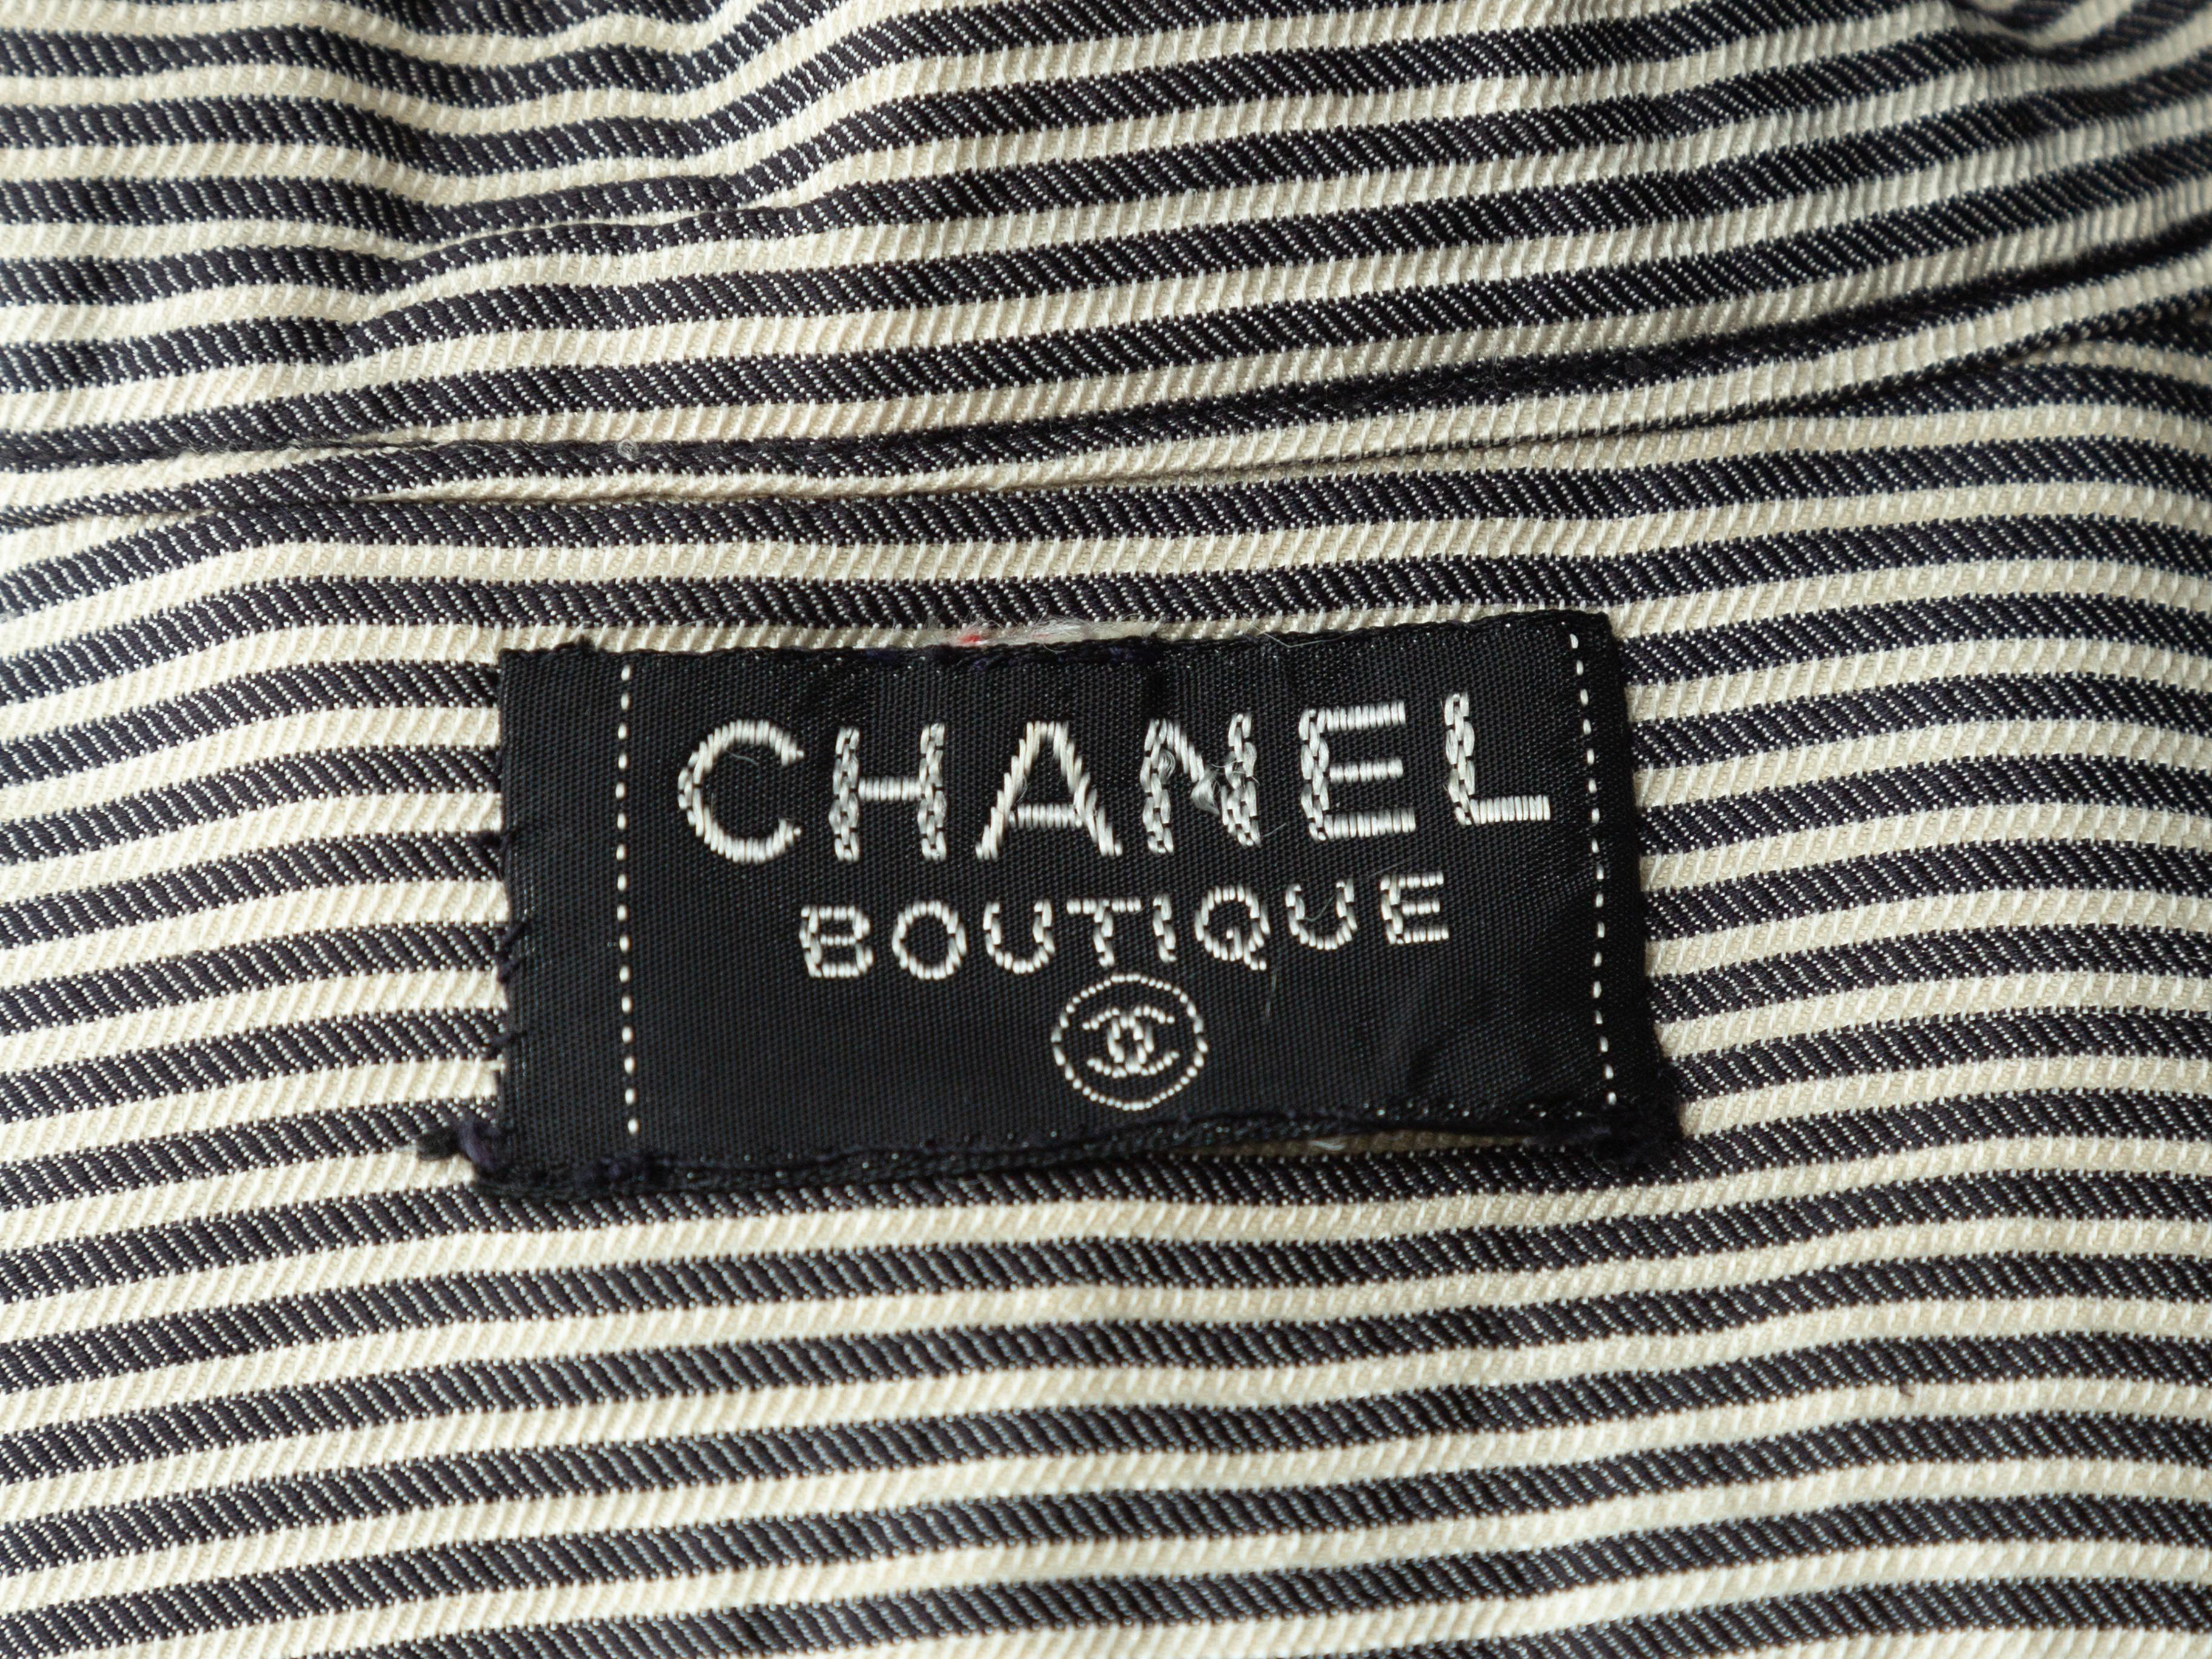 Product details: Vintage white and black striped long sleeve top by Chanel Boutique. Mandarin collar. Button closures at center front. 34